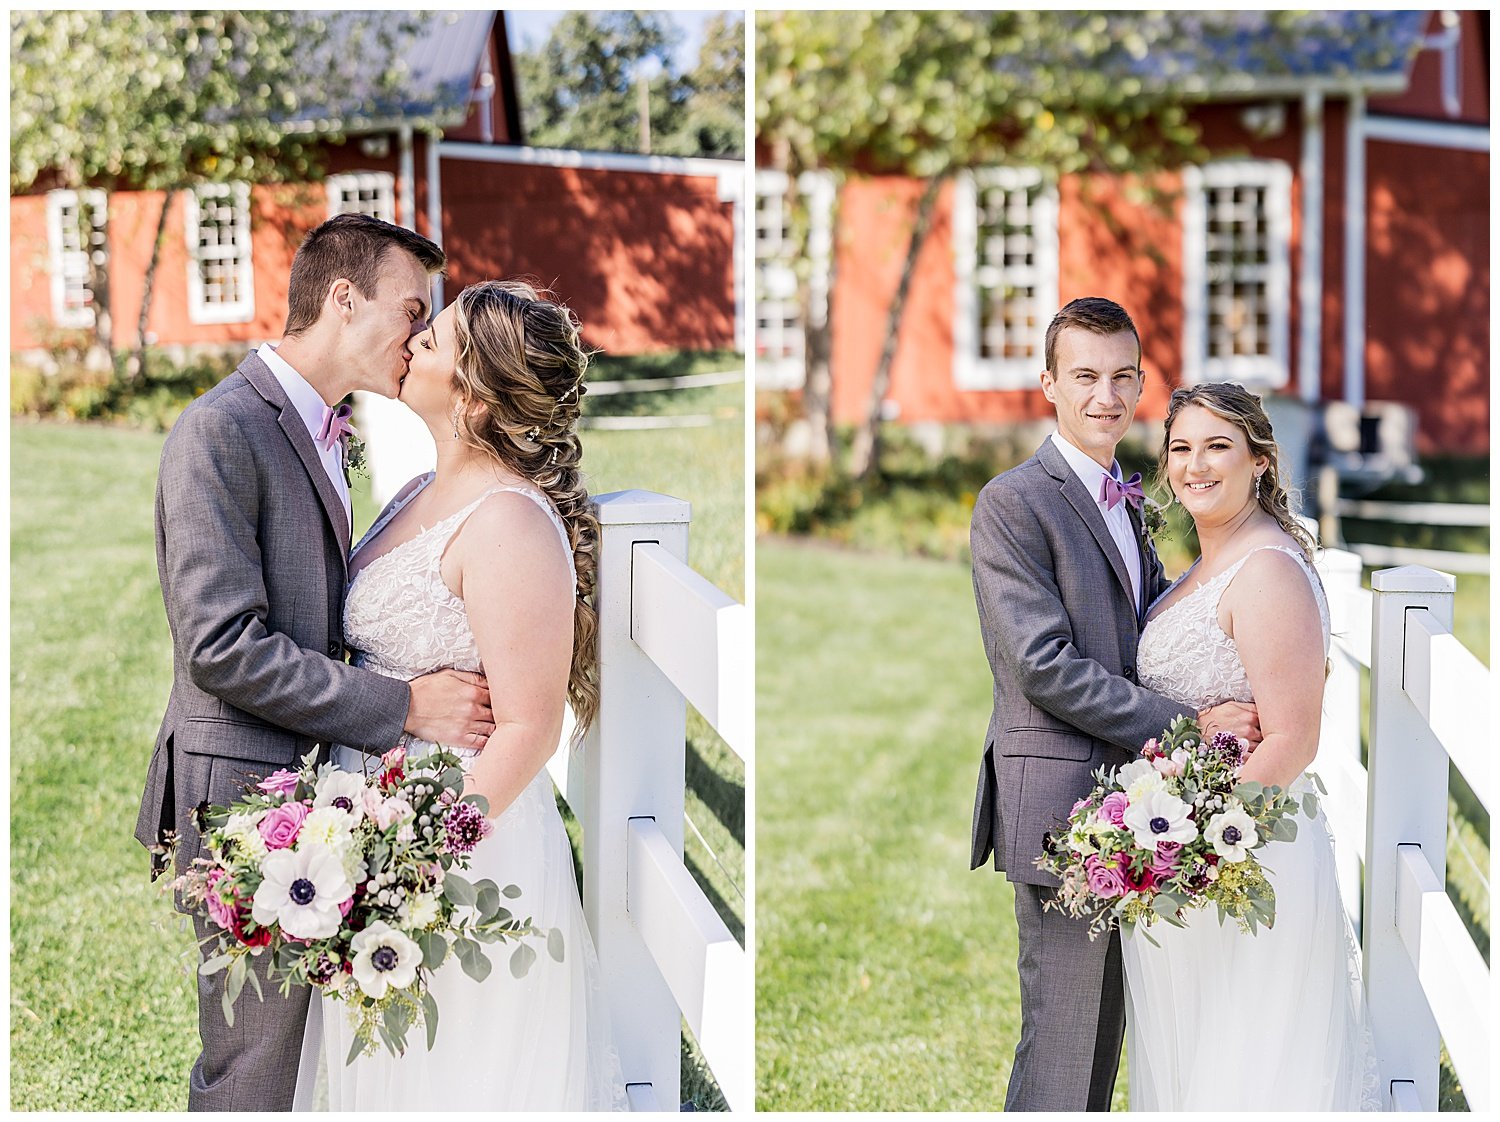 Therese Dan Married Pond View Farm Wedding Living Radiant Photography Blog_0051.jpg